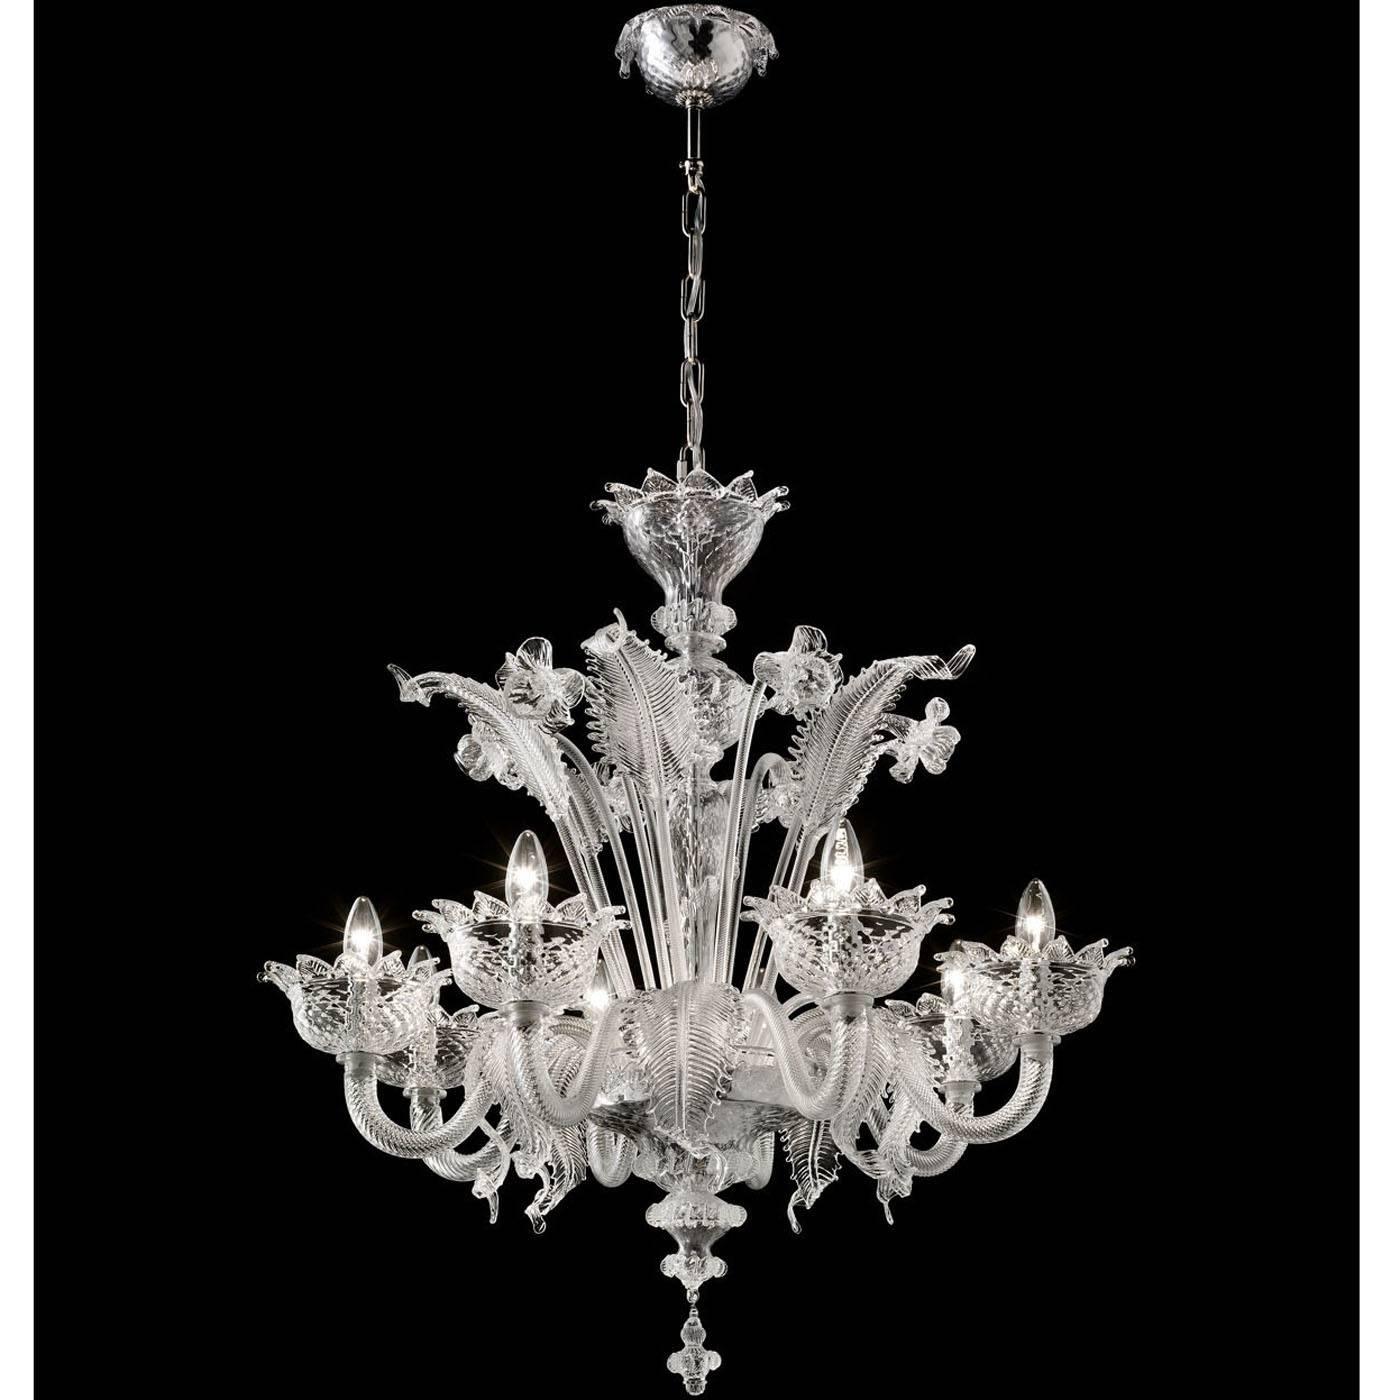 This magnificent chandelier in Murano glass features six lights elegantly adorned with an array of Fine flowers and leaves, reproducing a traditional model from the 19th century. The metal accents can be in galvanized gold or in polished chrome.